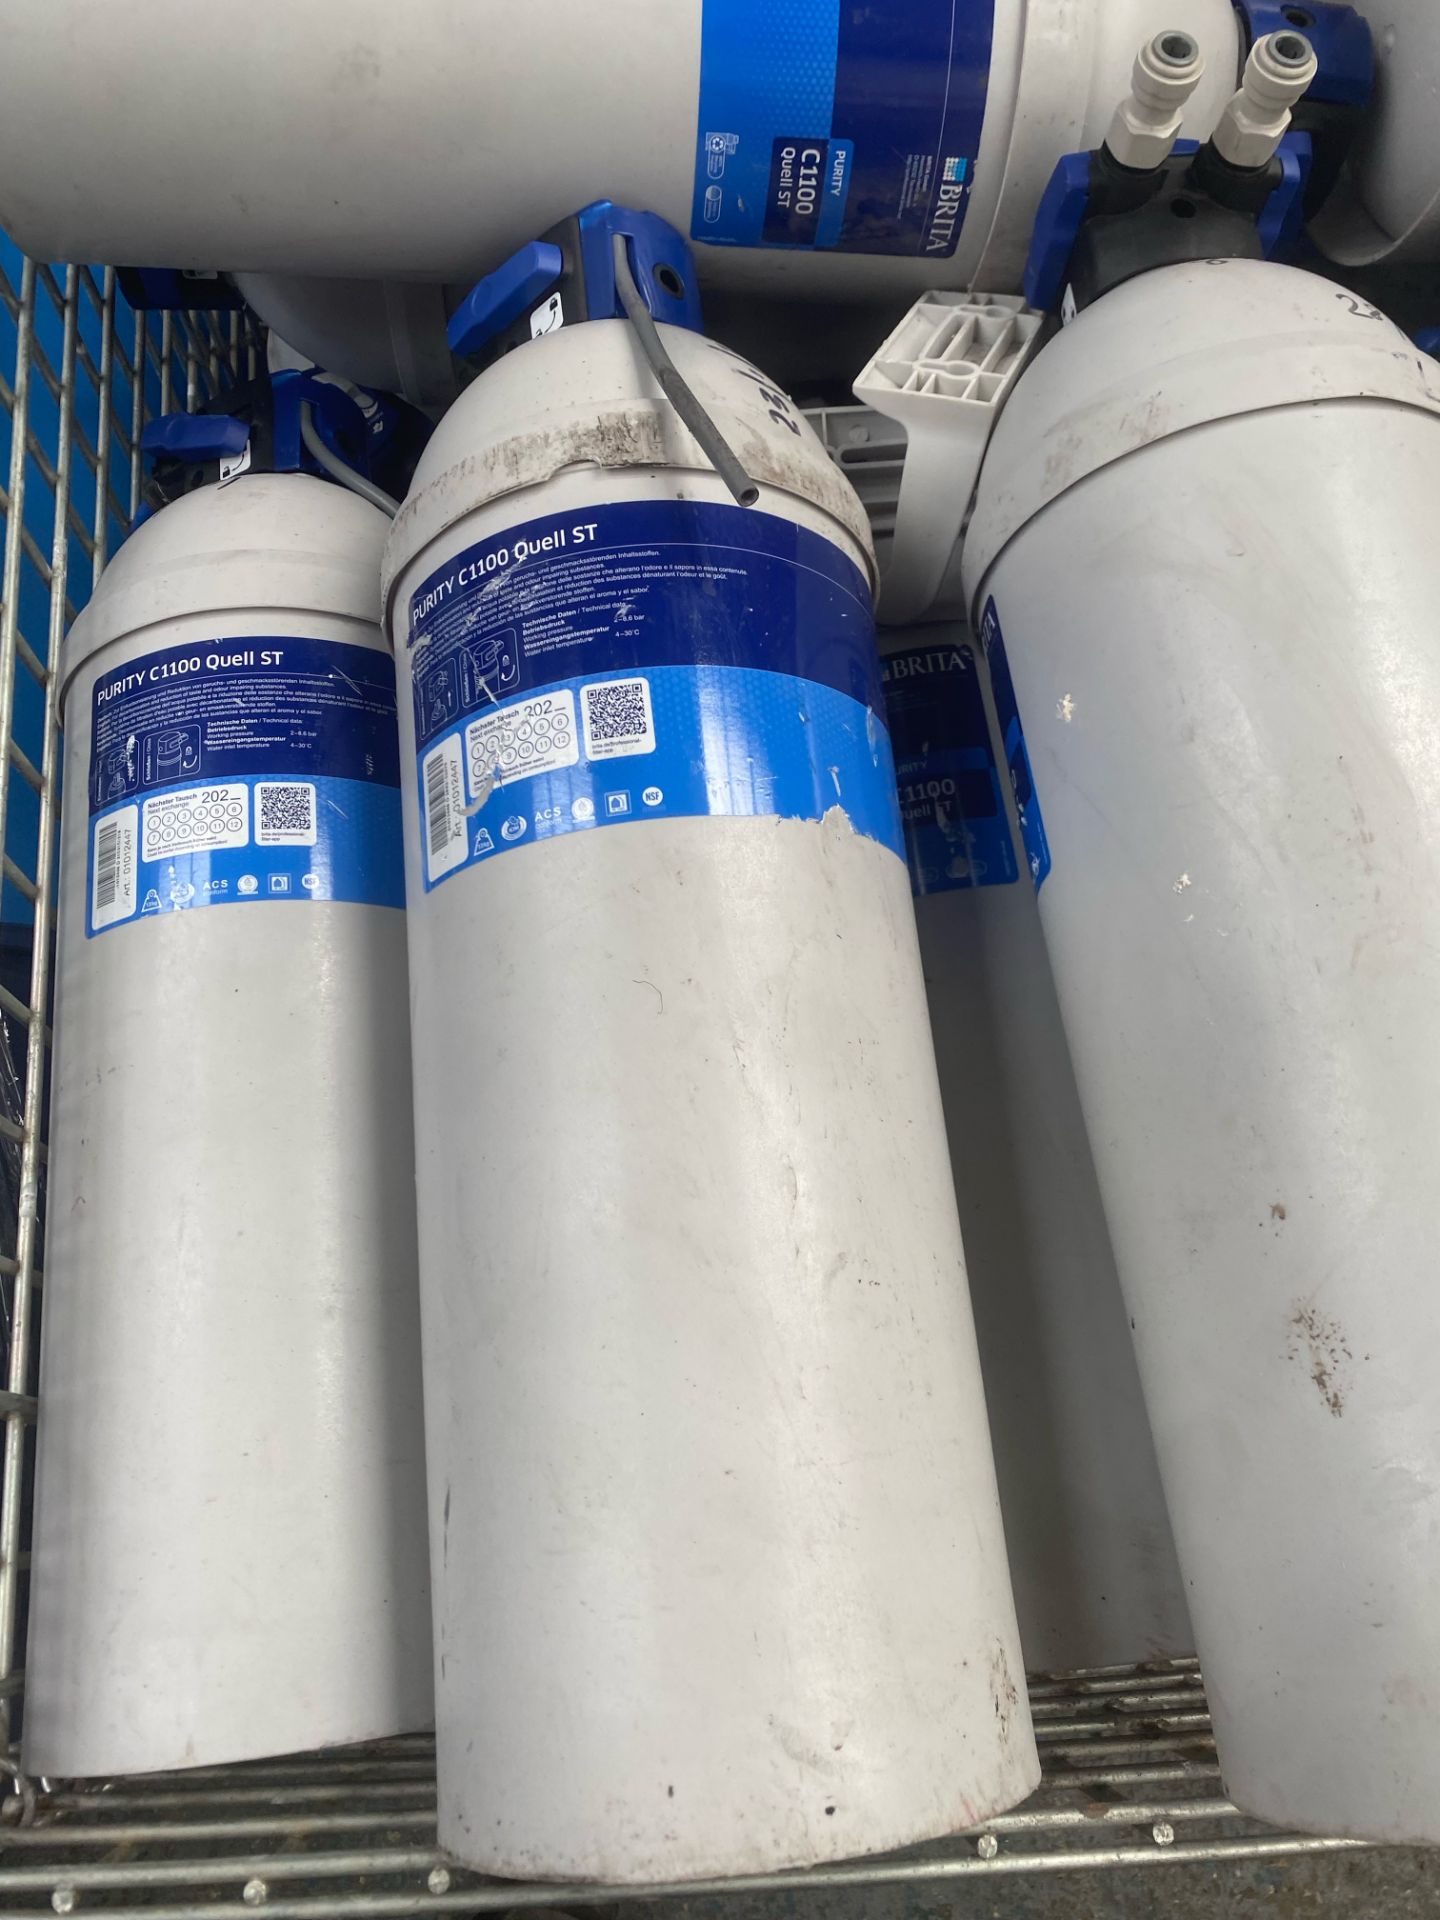 PALLET OF APROX 50 USED BRITA WATER FILTERS C1100 RRP £11500 - Image 4 of 6